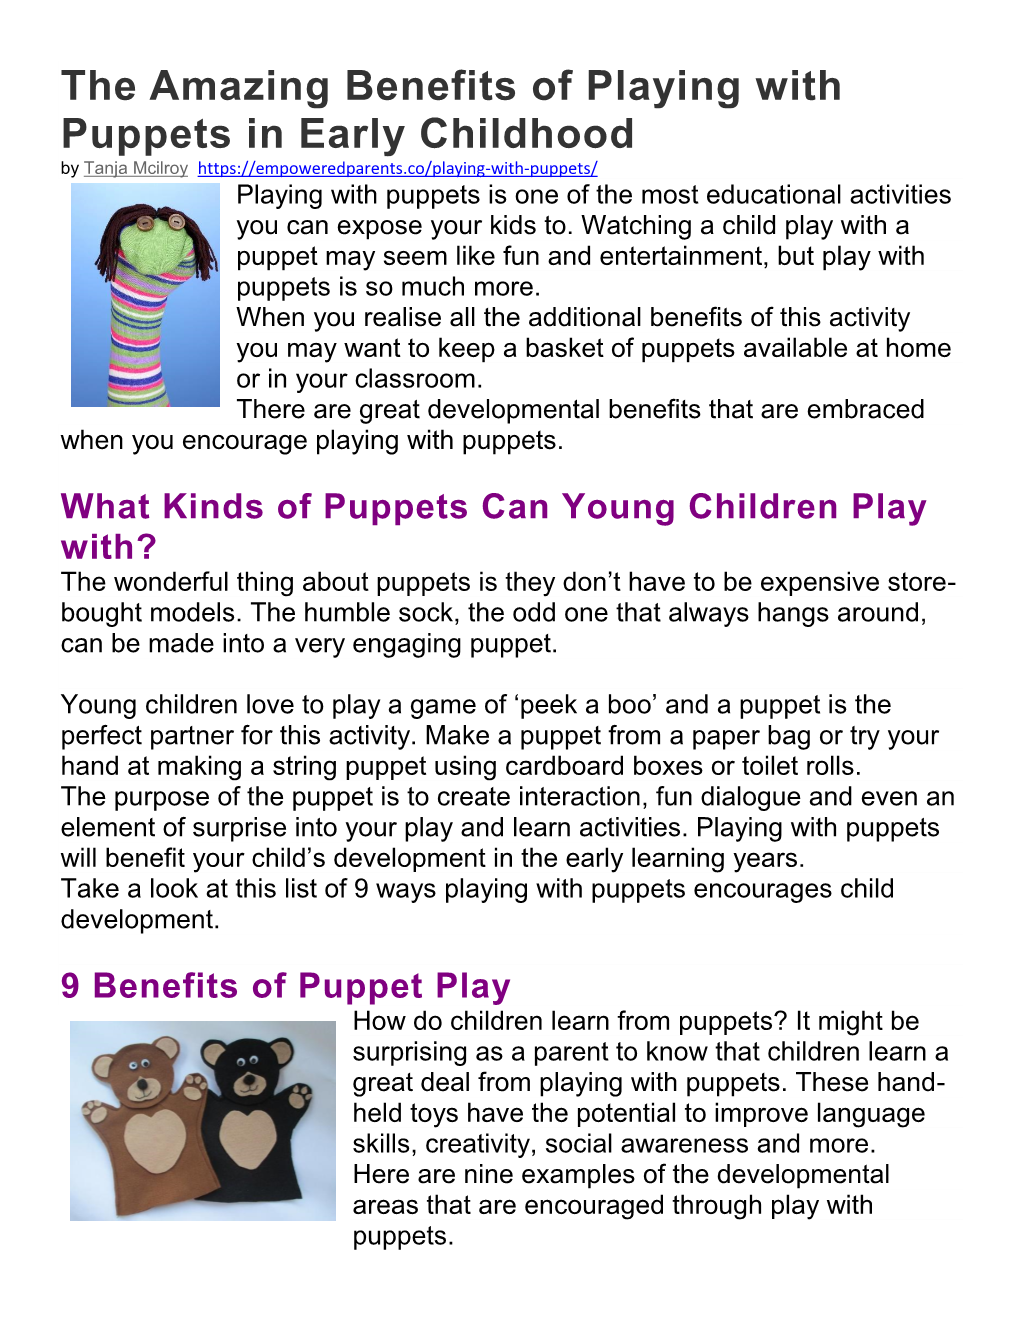 The Amazing Benefits of Playing with Puppets in Early Childhood